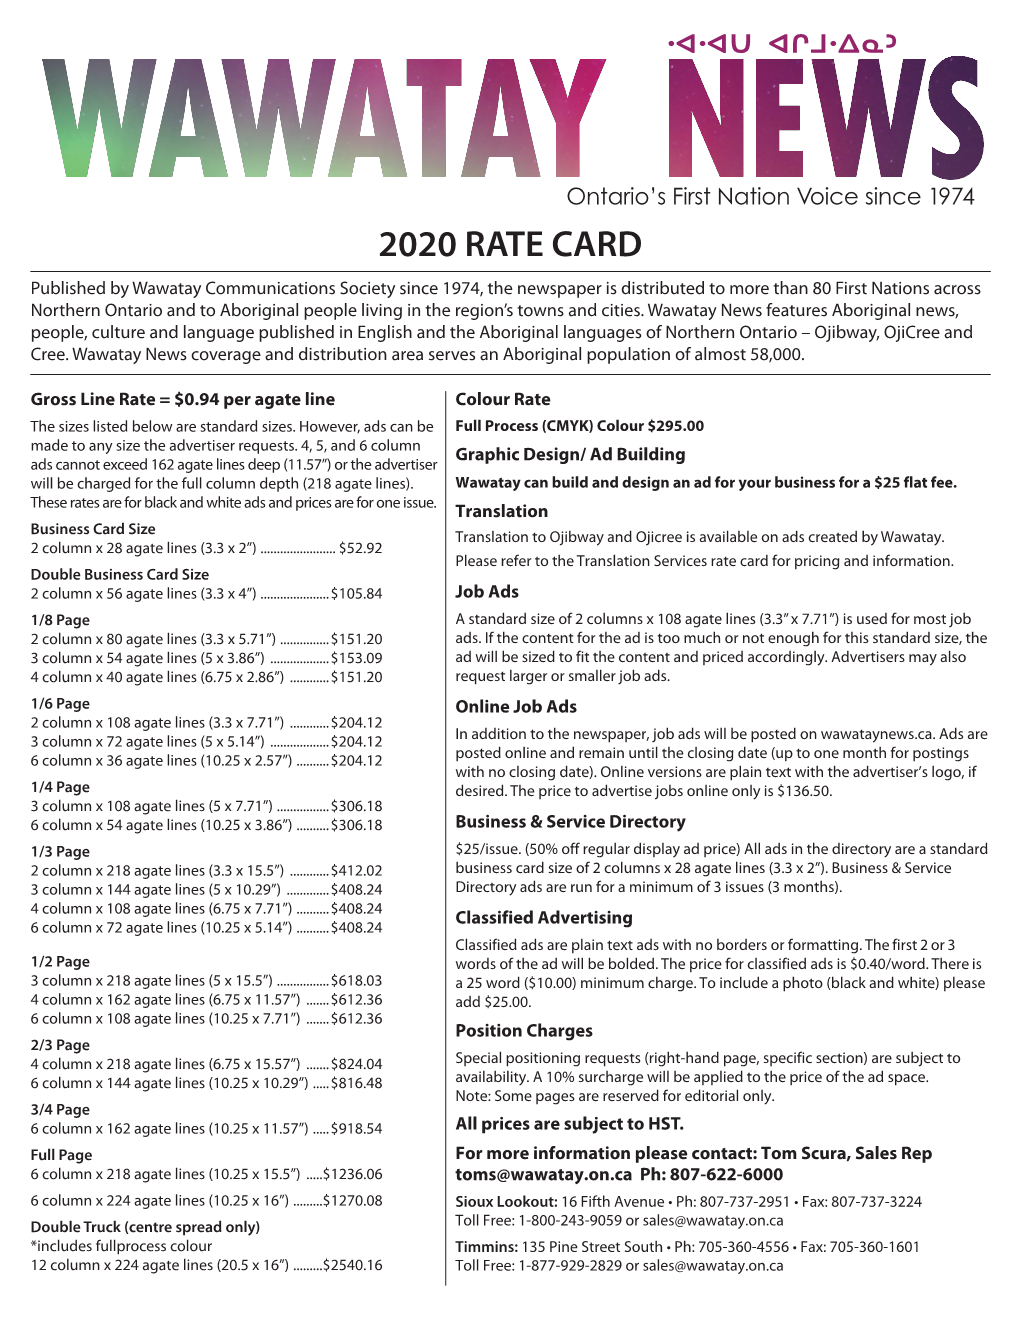 2020 Rate Card